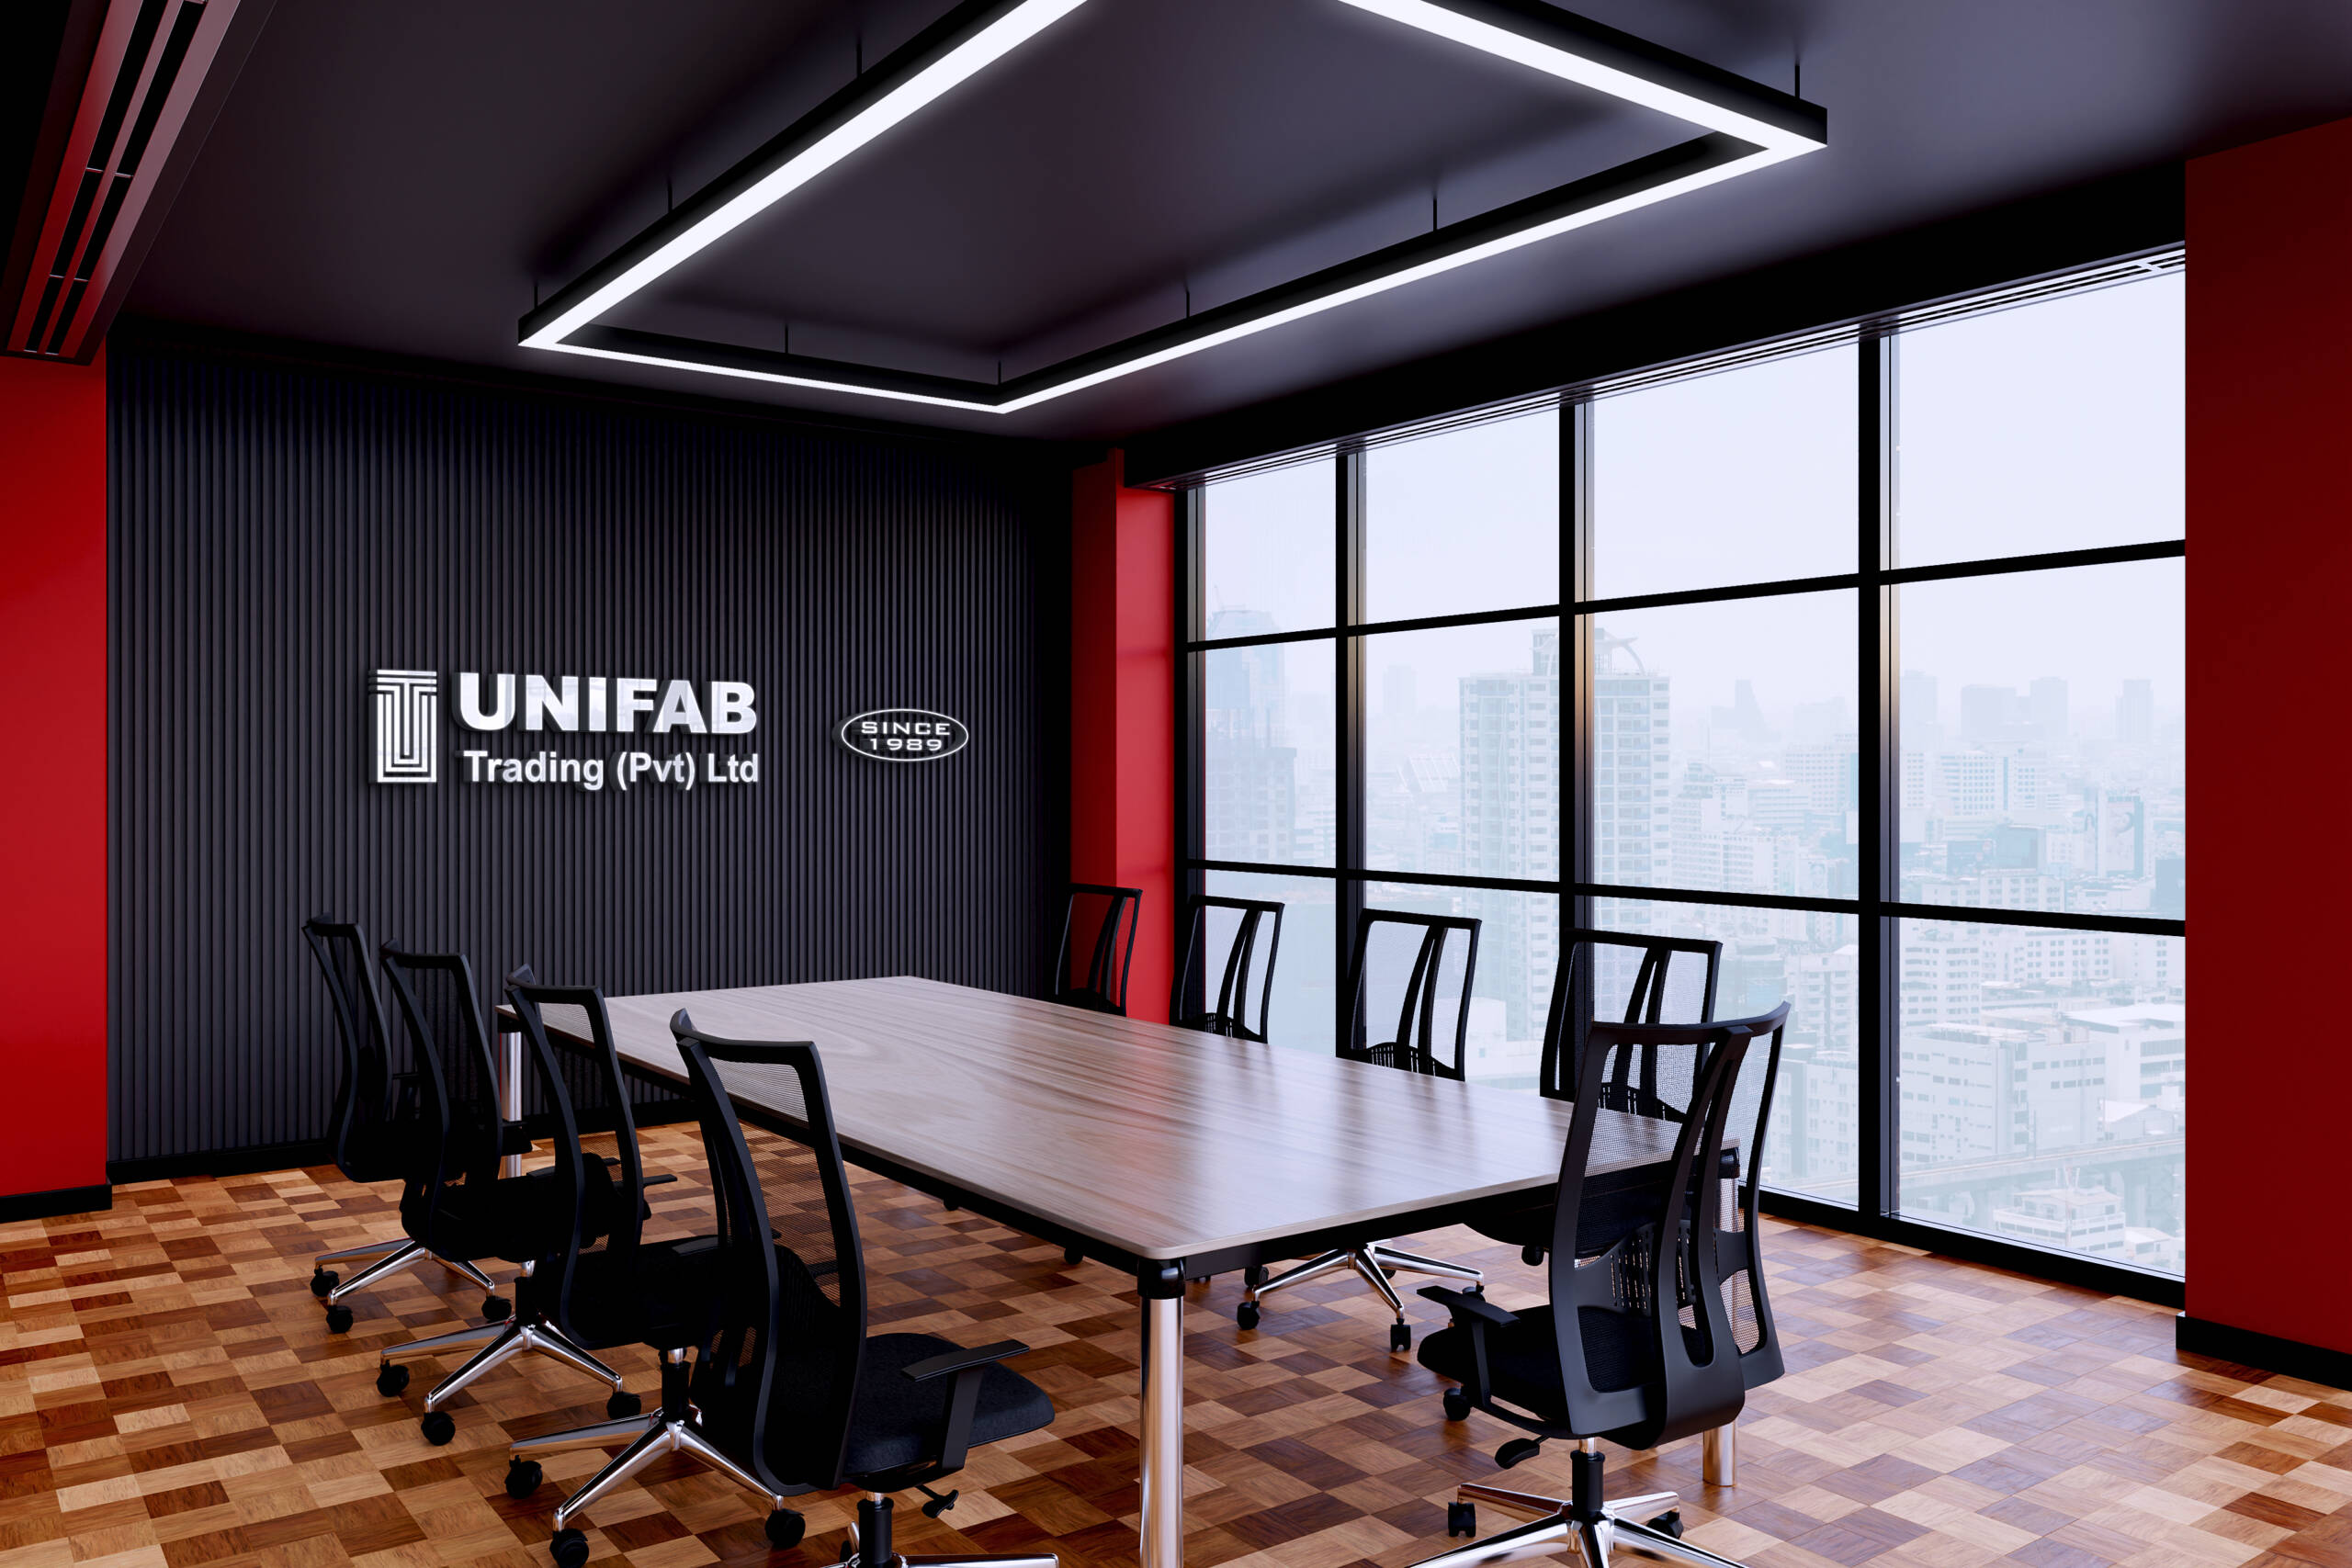 Unifab Trading About Us Image